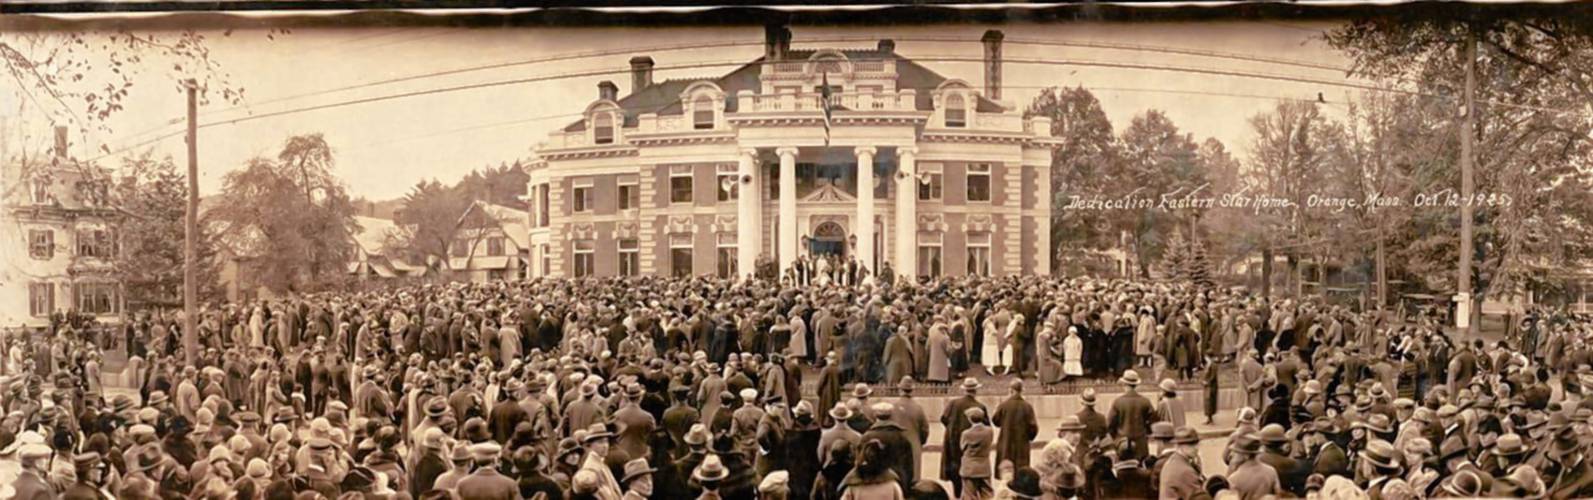 This photo was taken in October 1925 at the opening of the Eastern Star Rest Home, formerly the Wheeler Mansion in Orange. The event attracted more than 1,000 people. Cynthia Butler, current owner of the mansion, looked to create the 1925 photo at Monday’s ribbon-cutting ceremony.